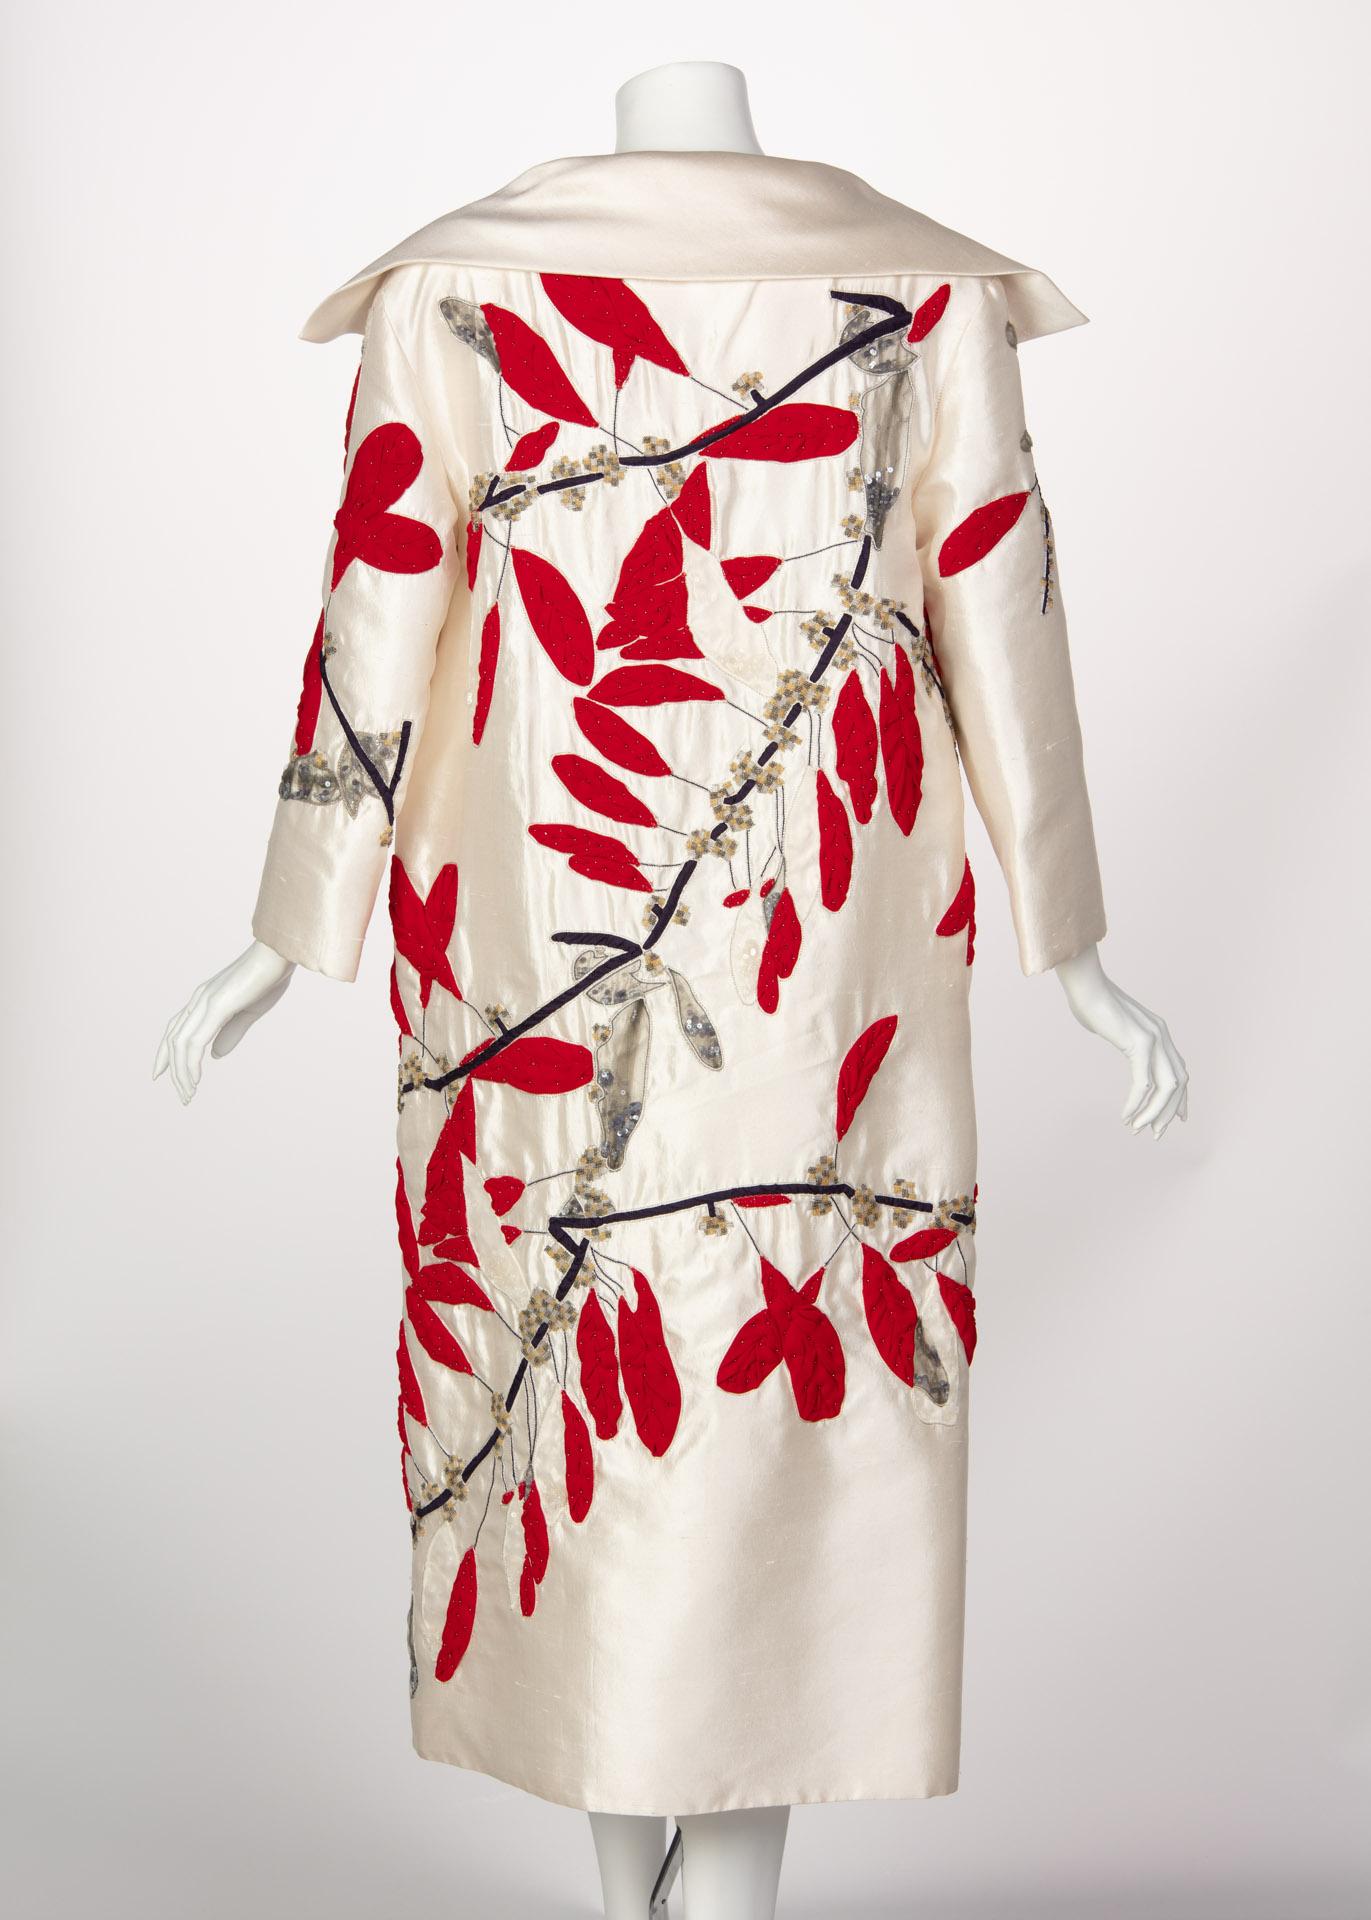 An Exquisite Ivory silk Valentino long evening coat with embroidered and beaded branches and leaves motif  throughout.
The leaves are sculpted from red silk and sewn on by hand, each leave is detailed with beading and framed with silver metal